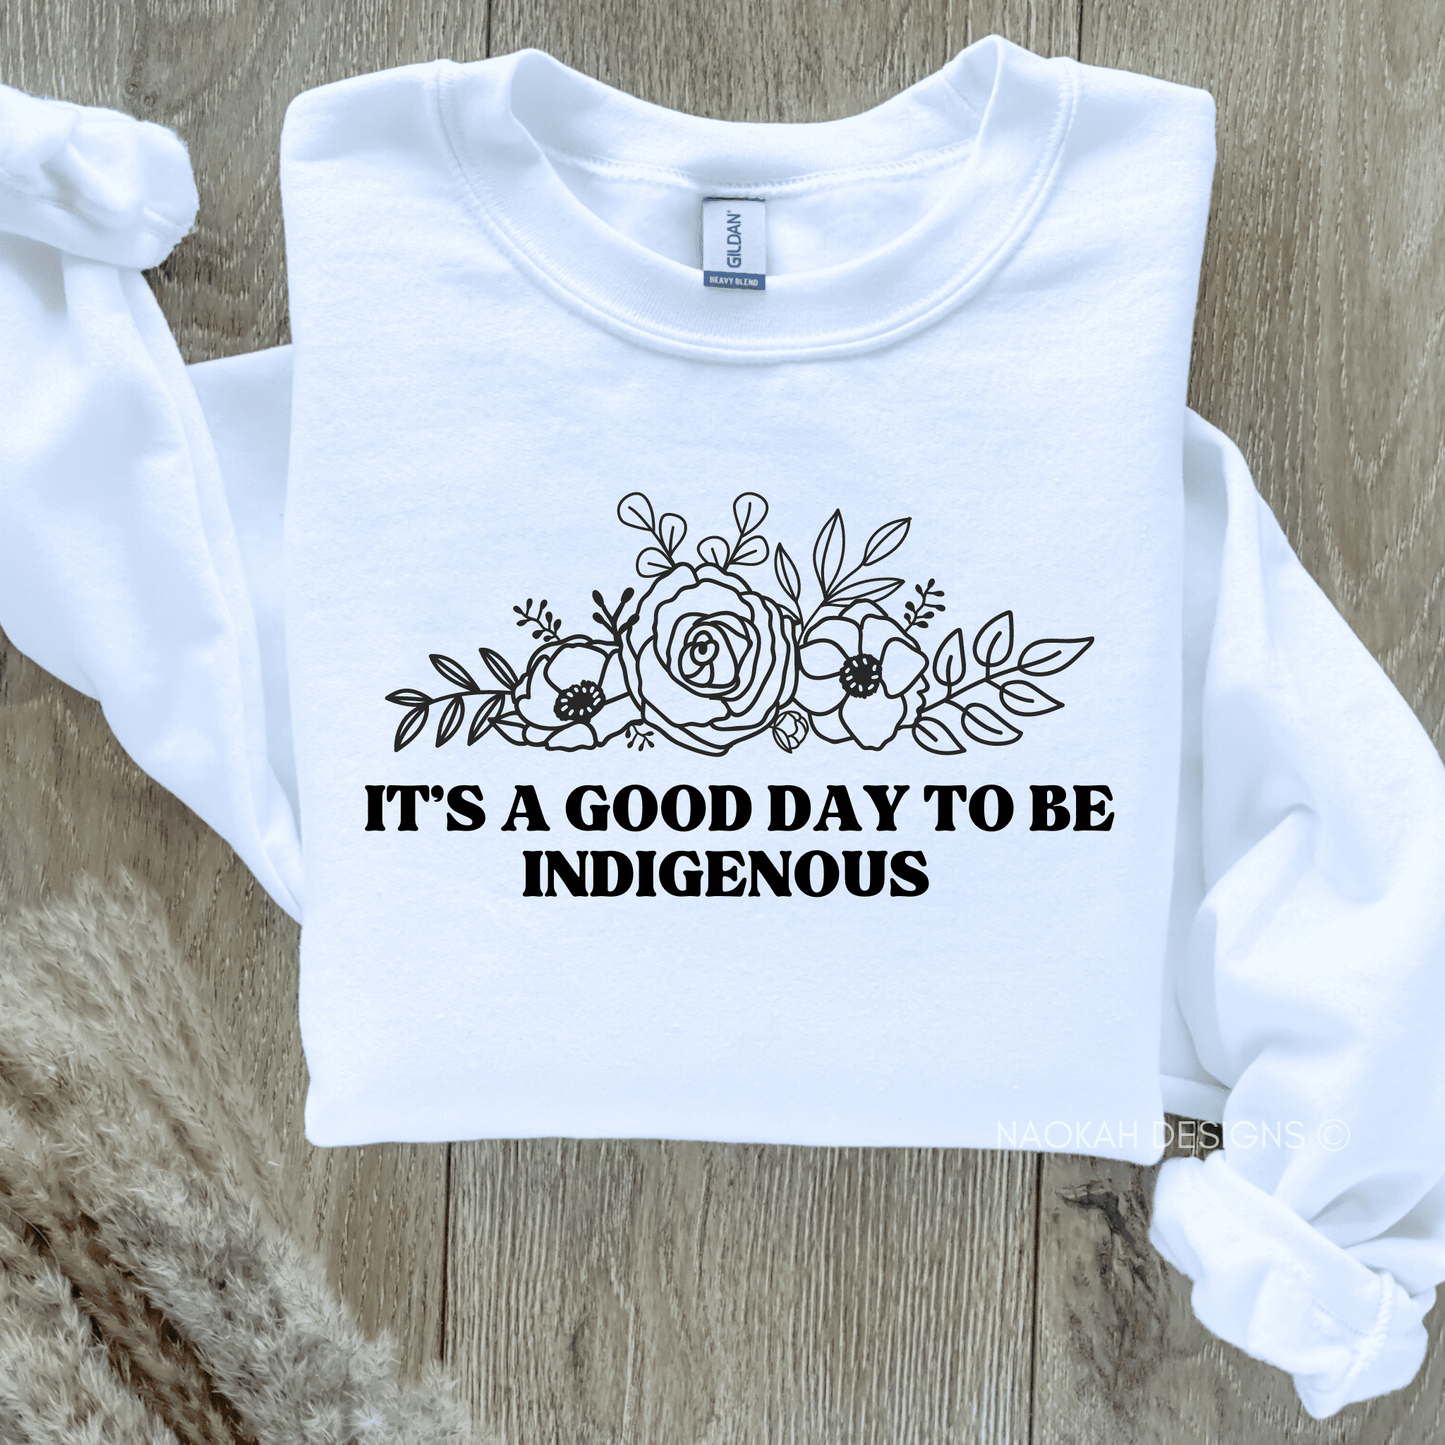 it's a good day to be indigenous shirt, indigenous unisex sweater, indigenous educated, proudly indigenous, indigenous graduation